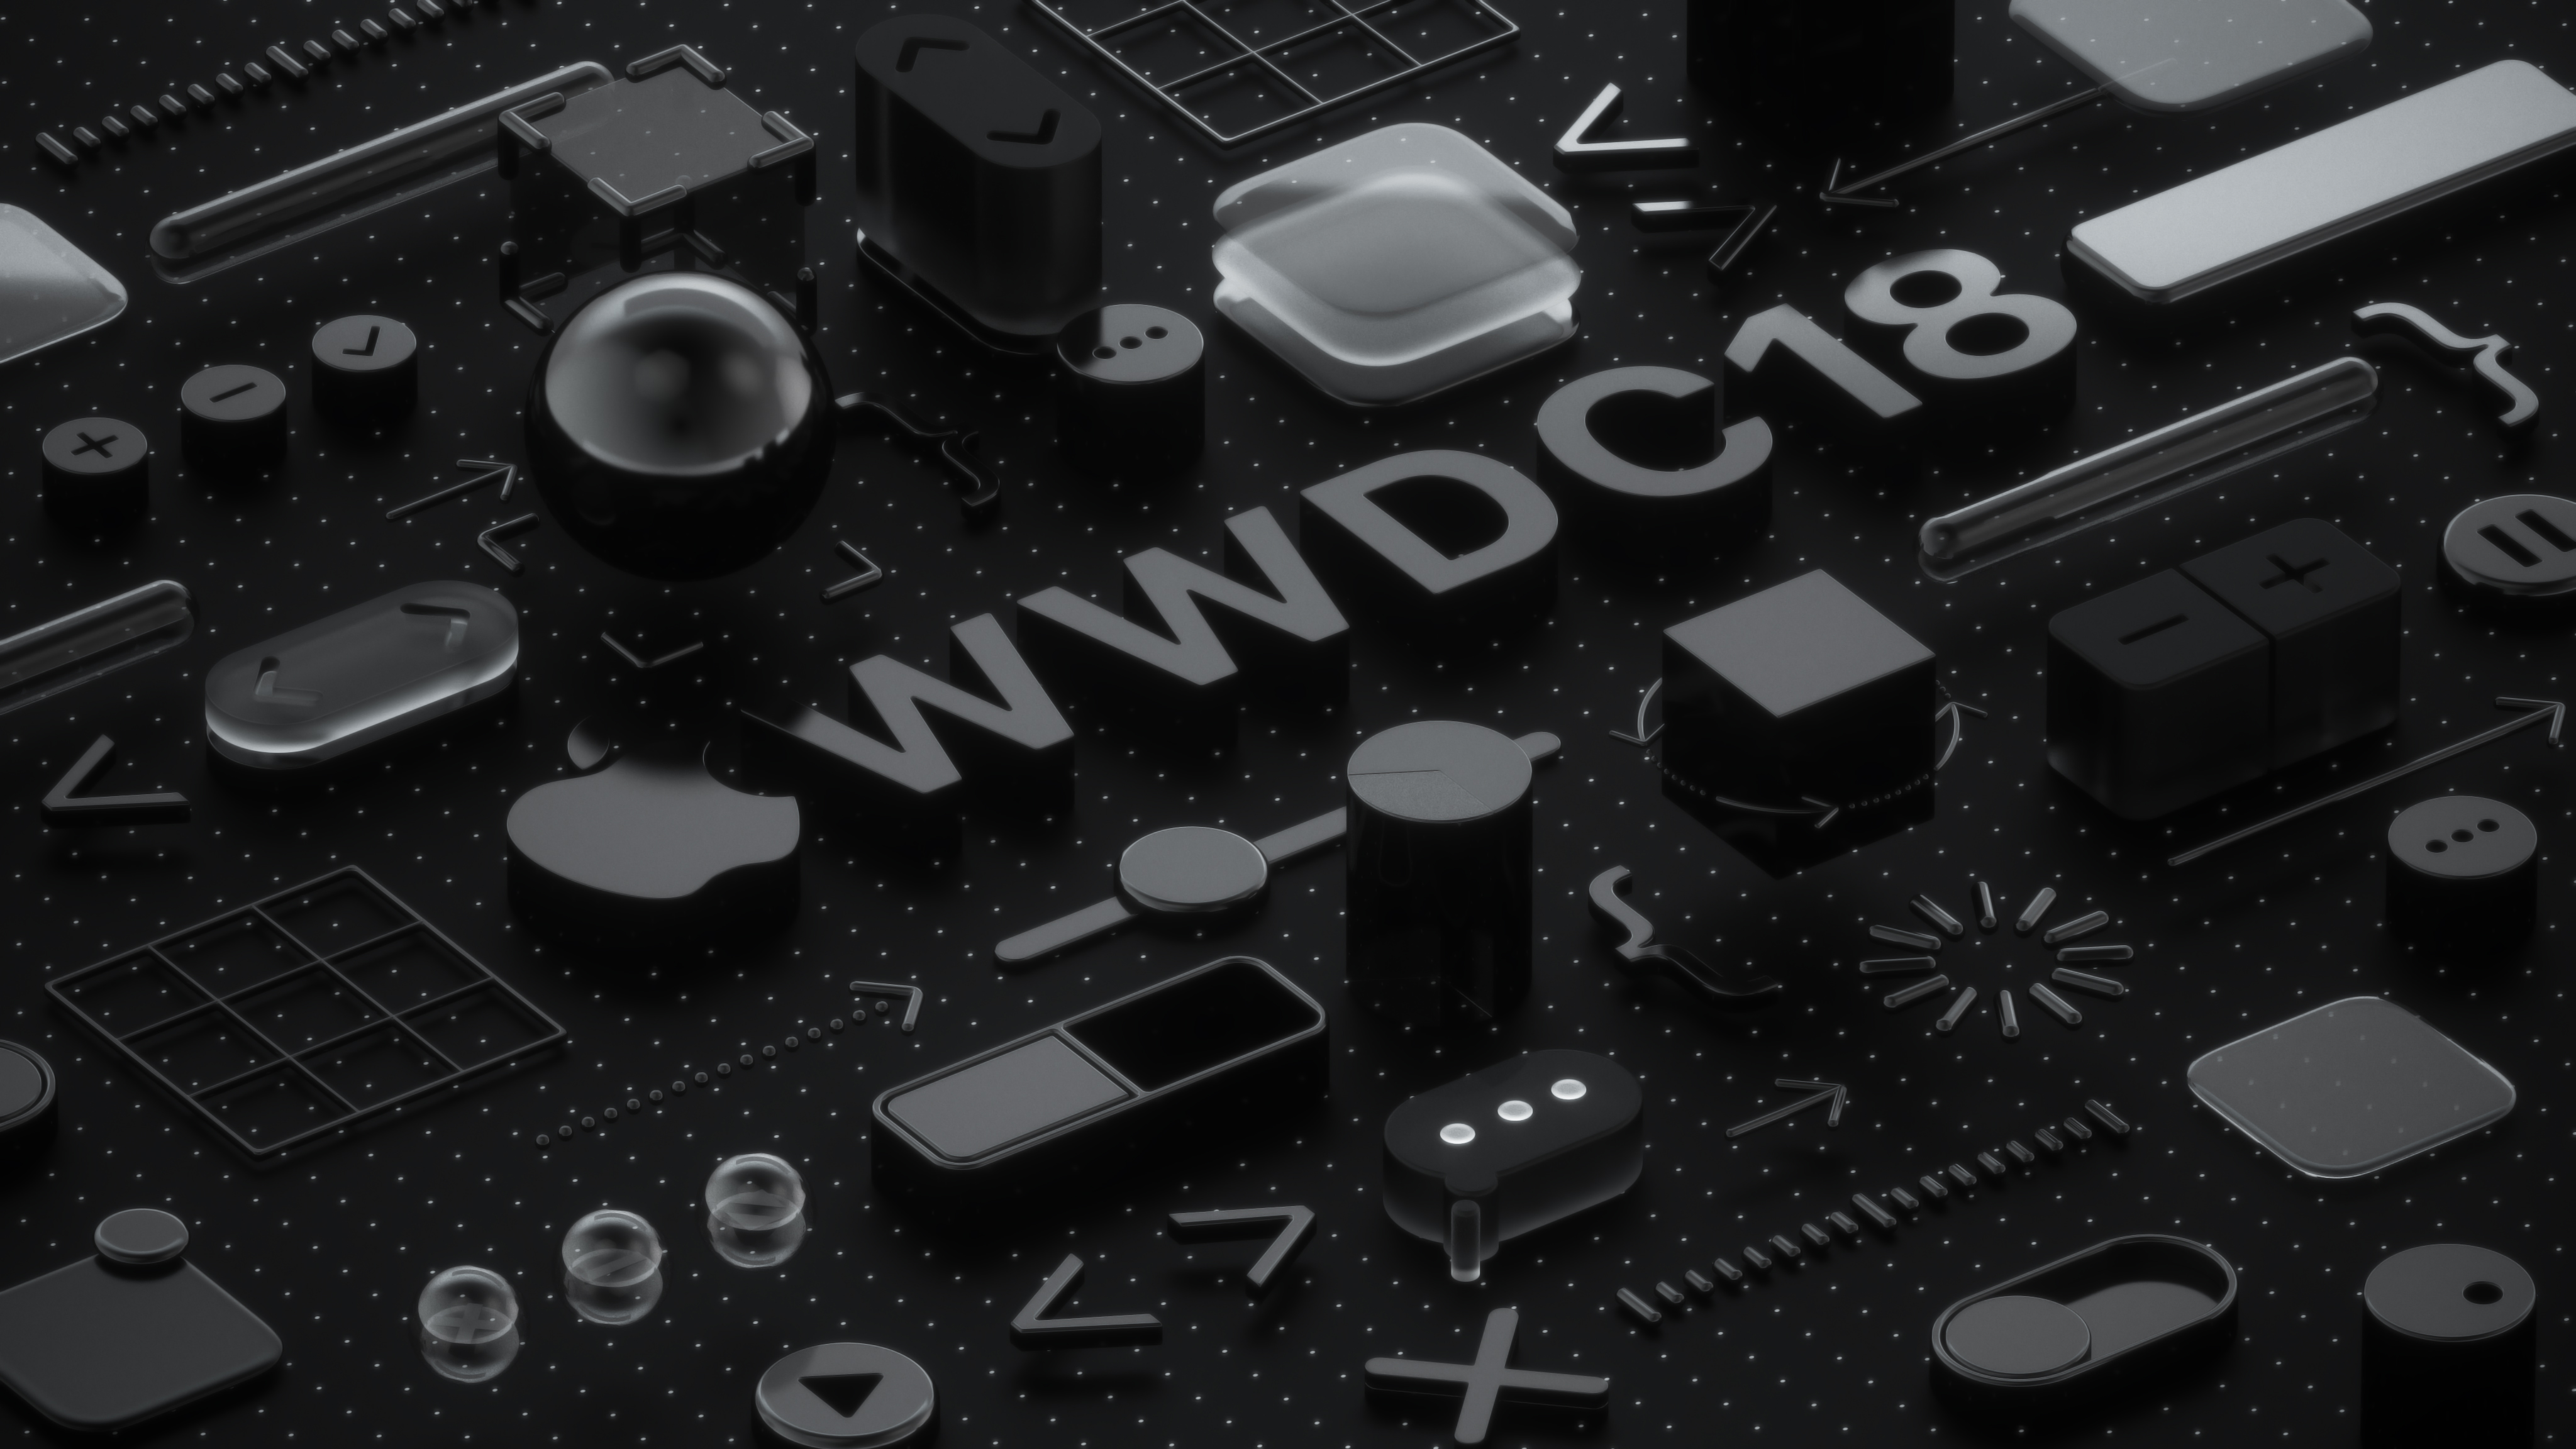 Get ready for WWDC 2018 with these wallpapers optimized for iPhone & Mac -  9to5Mac